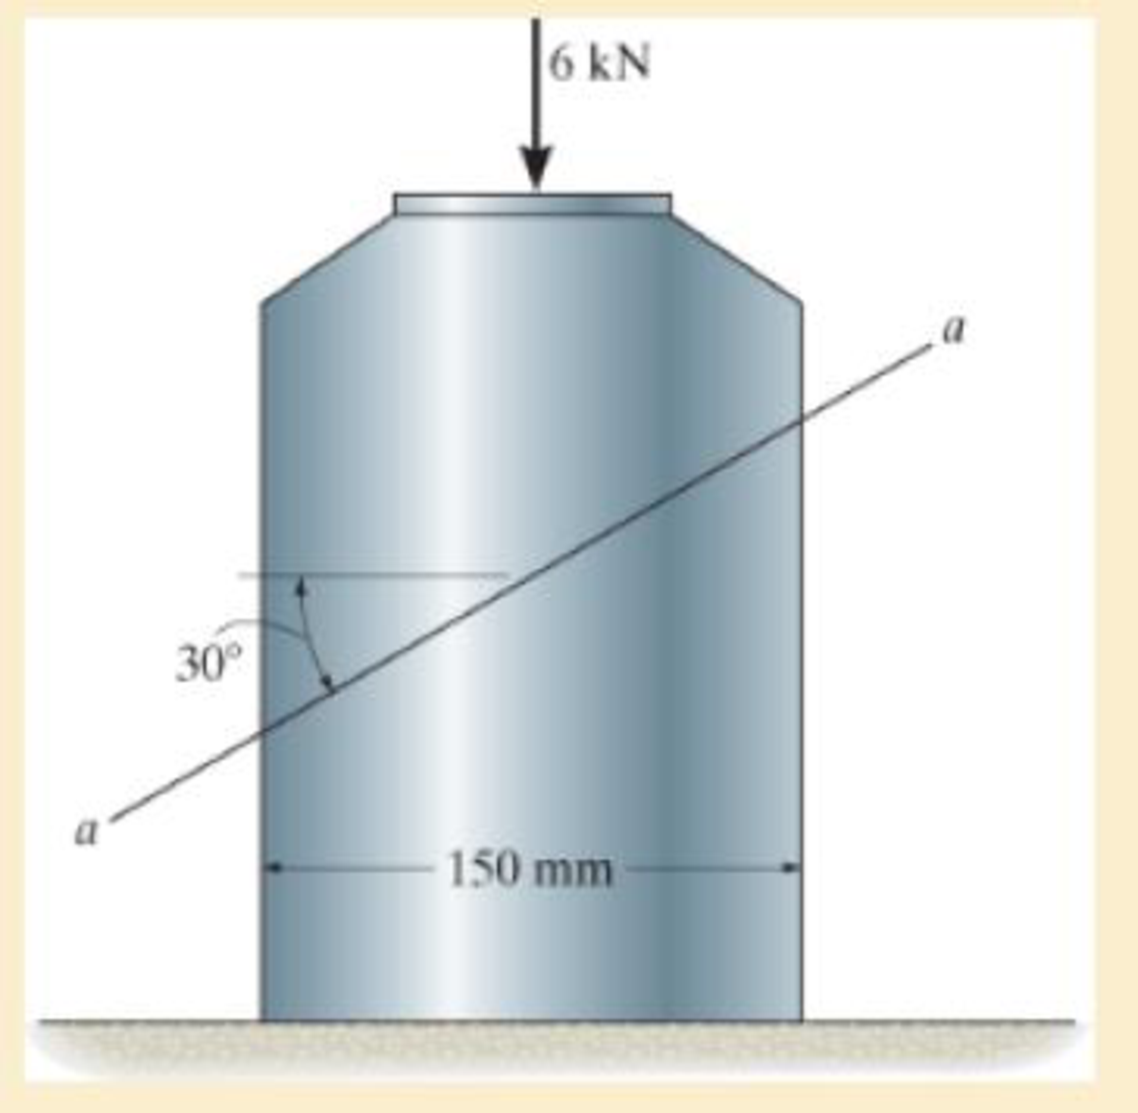 Chapter 1, Problem 1.102RP, The 150 mm by 150 mm block of aluminum supports a compressive load of 6 kN. Determine the average 